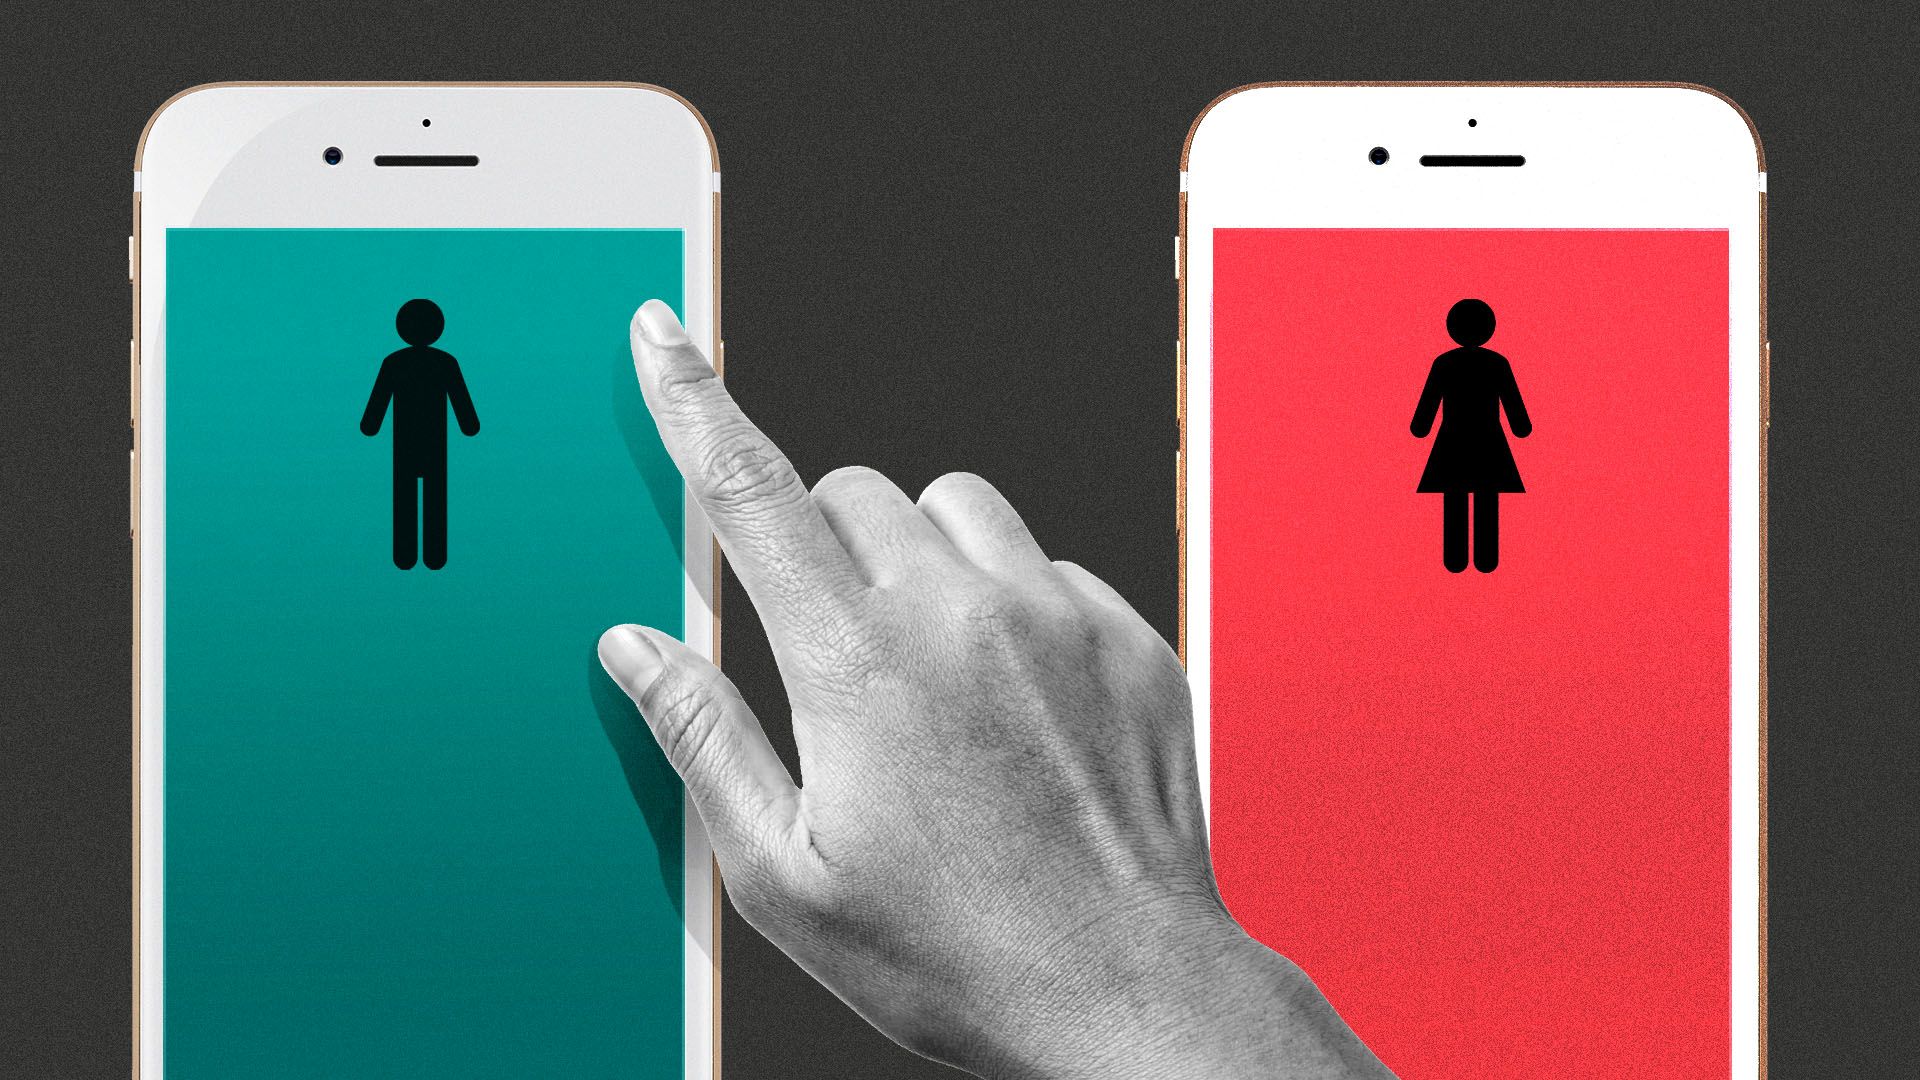 Illustration of a hand choosing between two phones, each with a male or female bathroom symbol on them